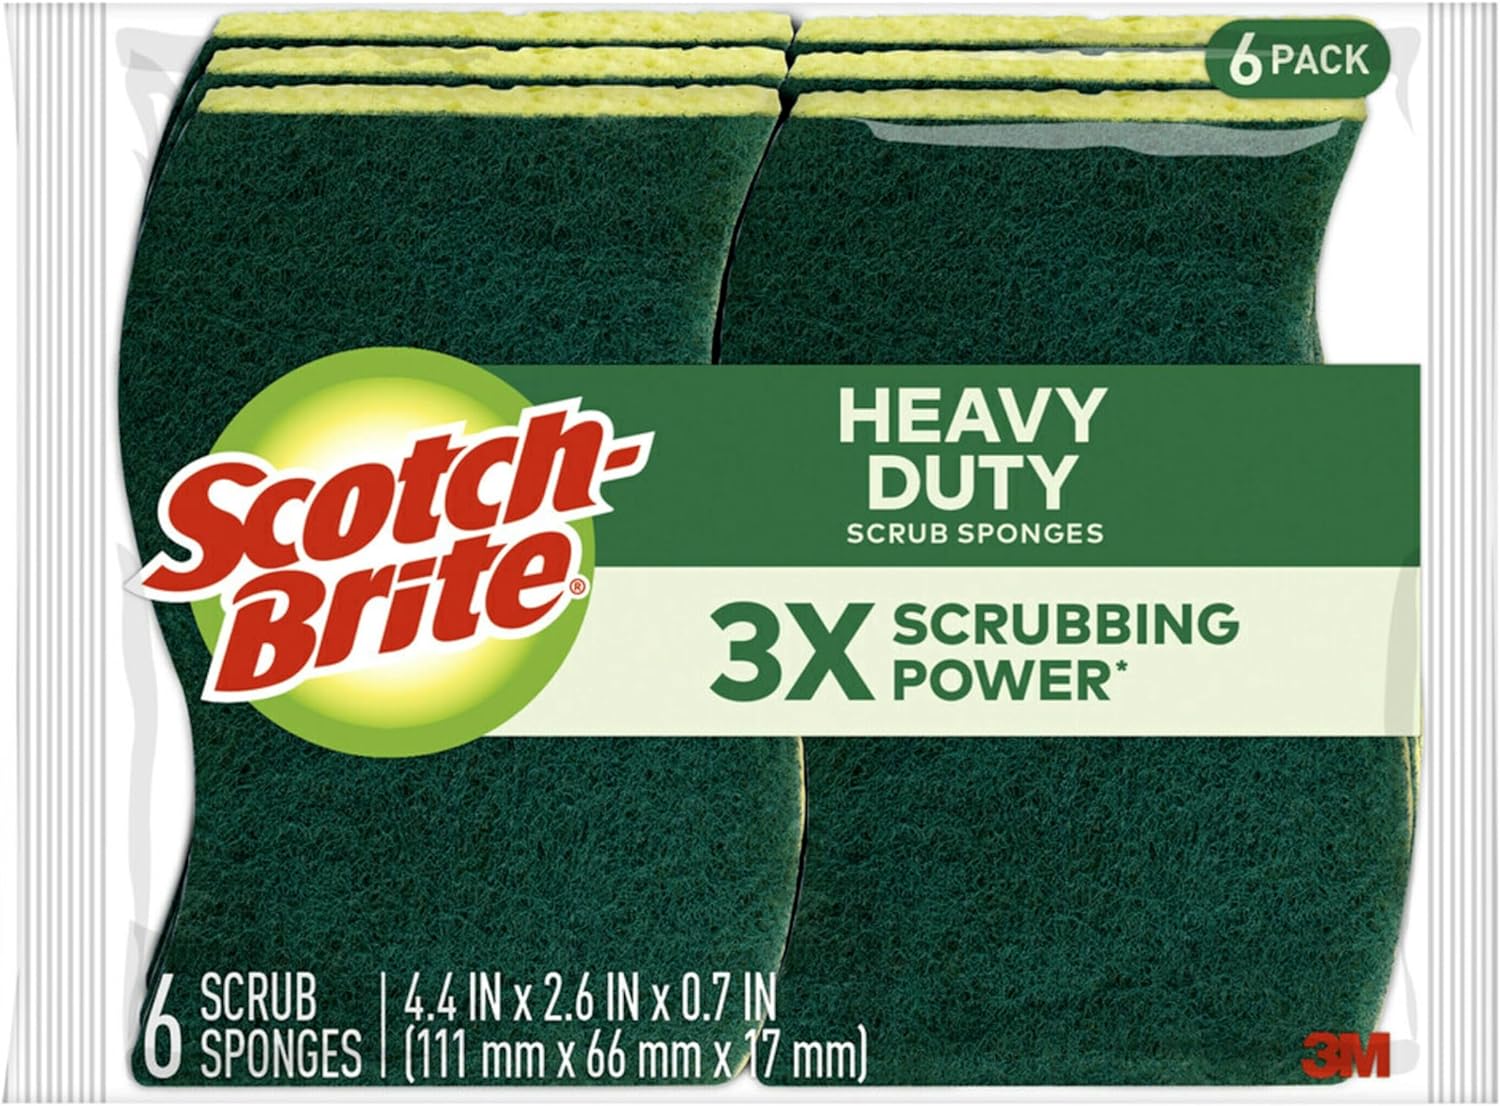 Because of their make-up on the green side (scrubber), you will want to use these on surfaces where either scratches do not show or do not matter. Do not use it on stainless, glass or plastic. They are great on tiles for removing calcified residue. Do not press too hard, circular motion at a steady pace will leave beautifully clean shower tiles.